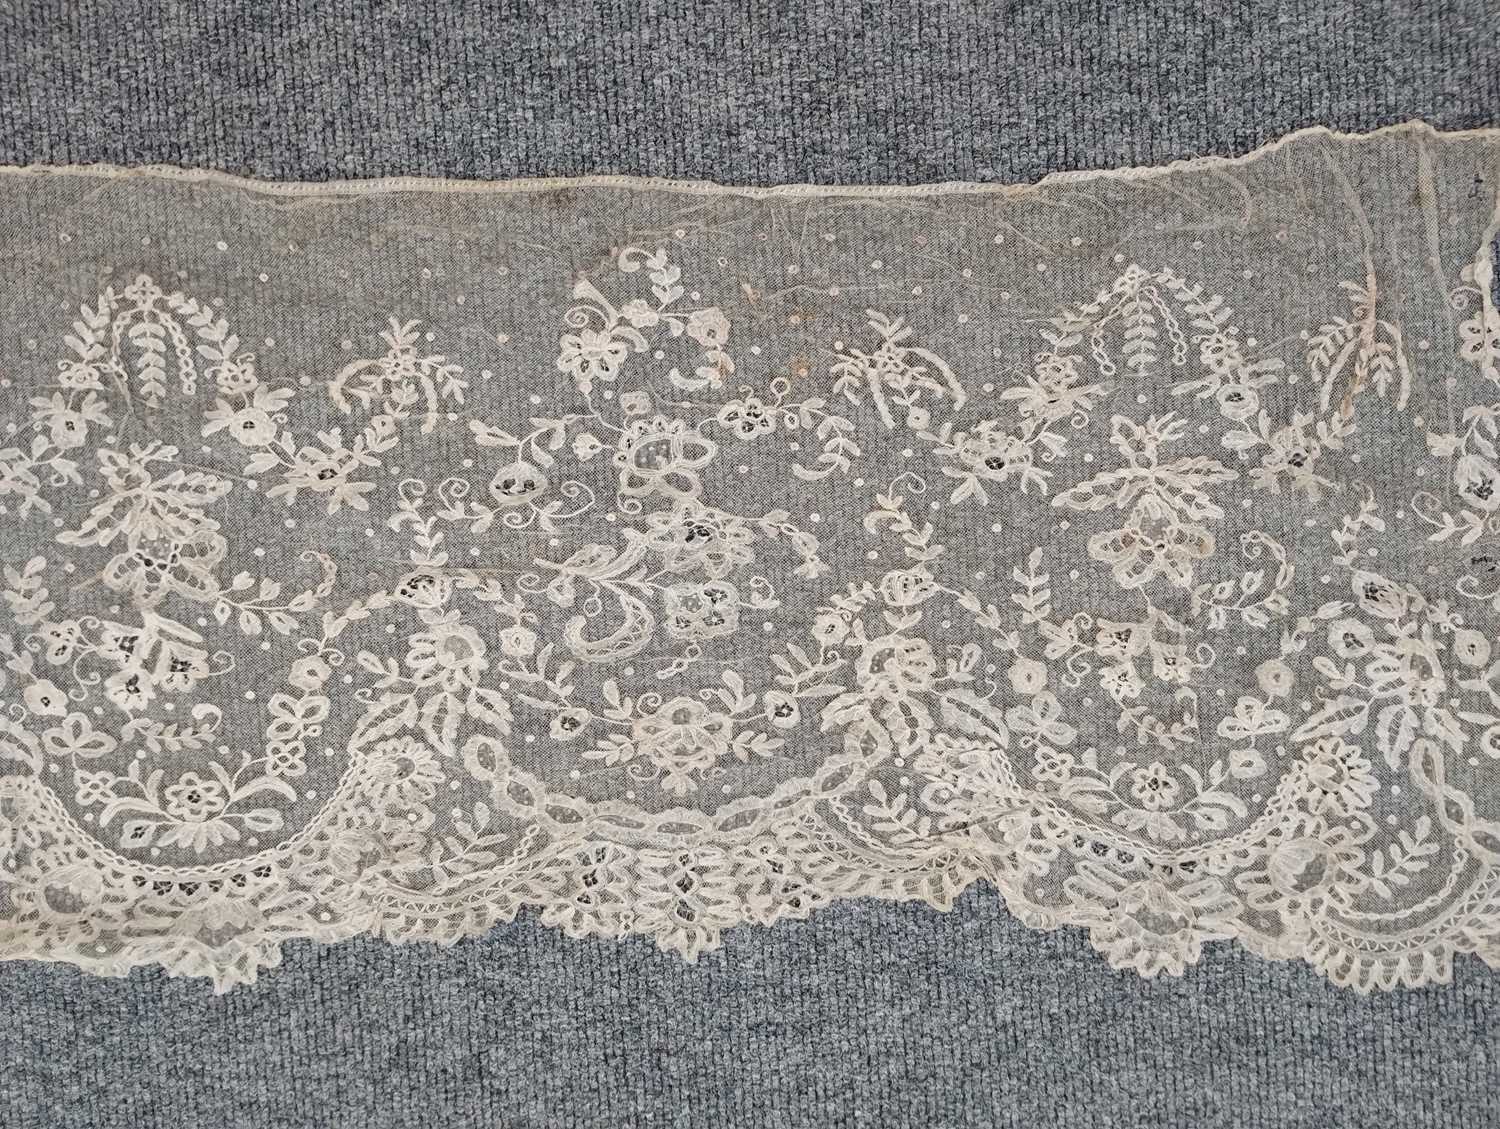 Early 20th Century Lace comprising a flounce with appliquéd flower heads and motifs within a - Image 24 of 32